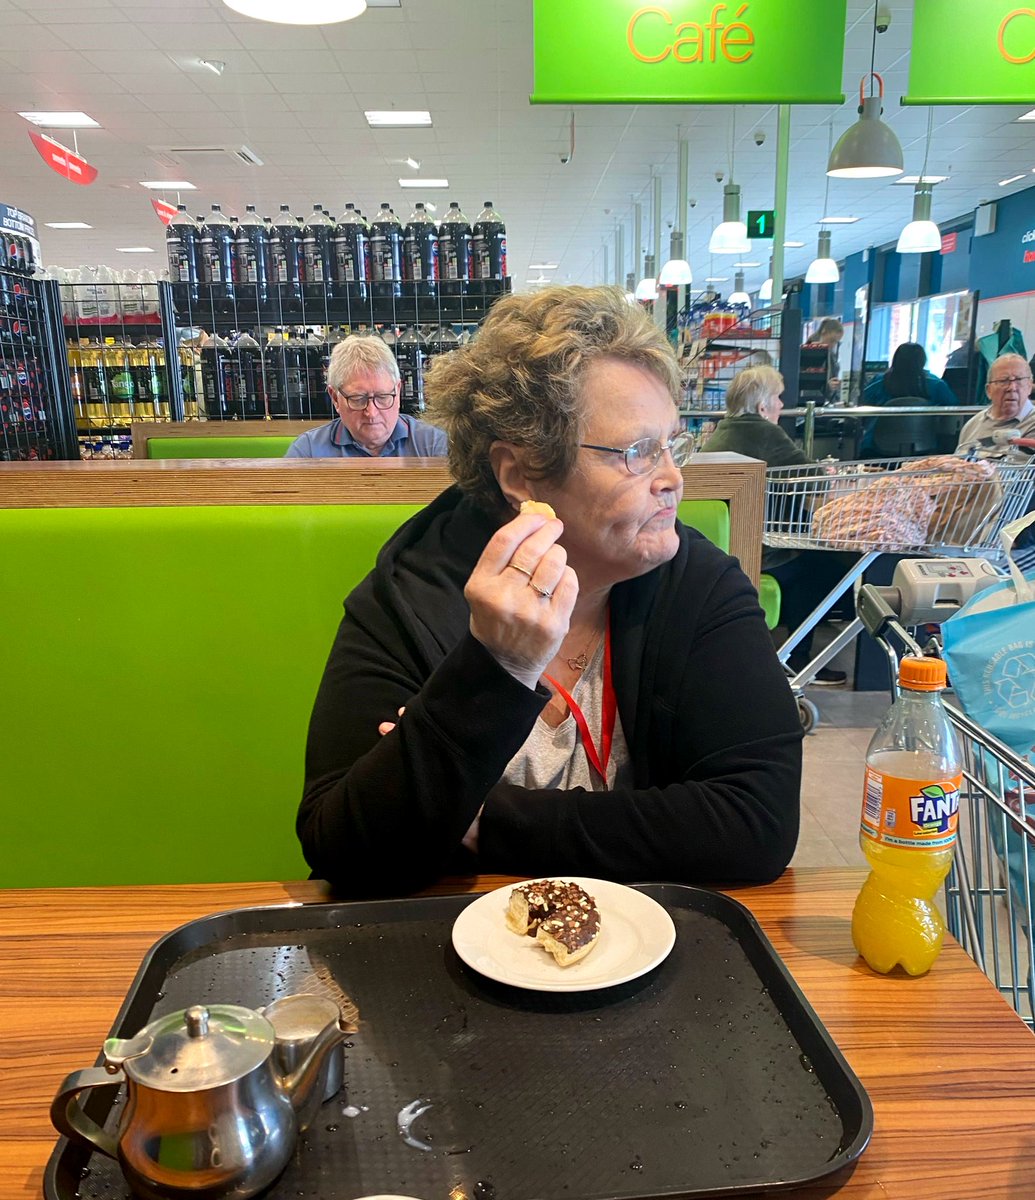 Daphne recently enjoyed a morning of shopping in the local town, followed by a cup of tea and a cake in the café!

#Blackburn #carehomes #carehomesuk #elderly #Lancashire #respite #daycare #residential #wecare #socialcare #care